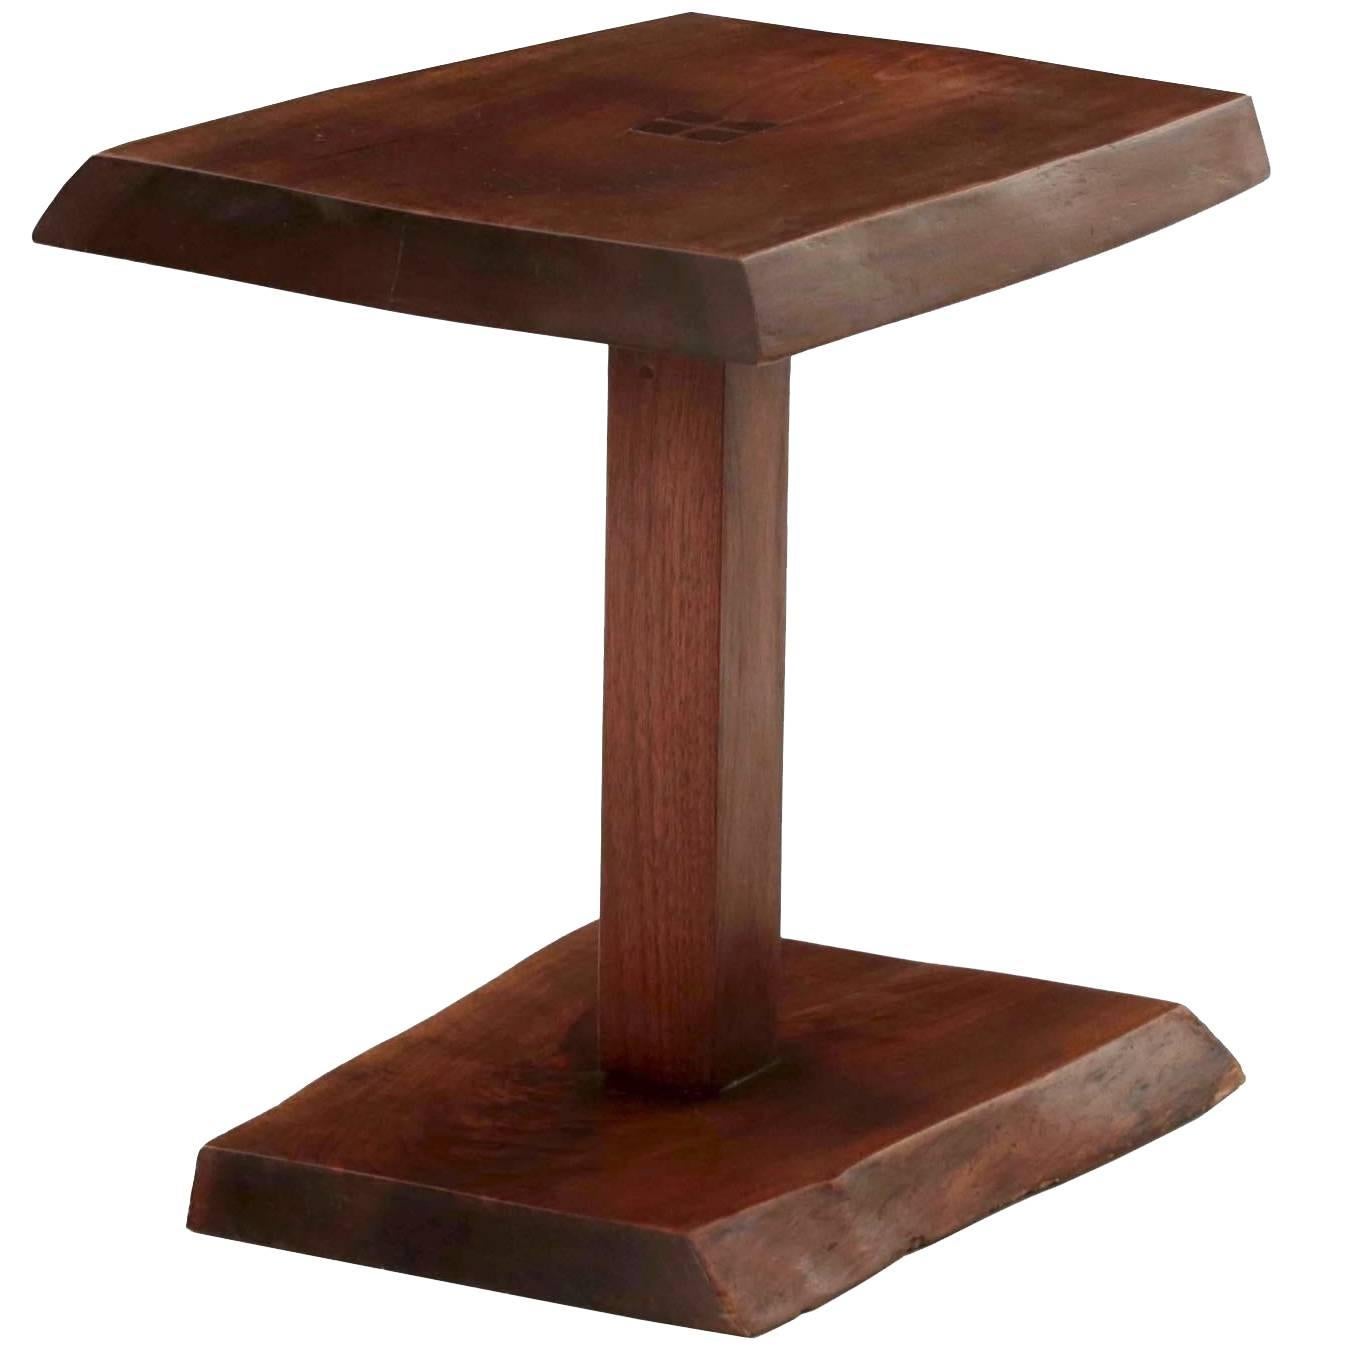 New Hope School Live Edge Walnut Side Table by Alan Rockwell, circa 1970s